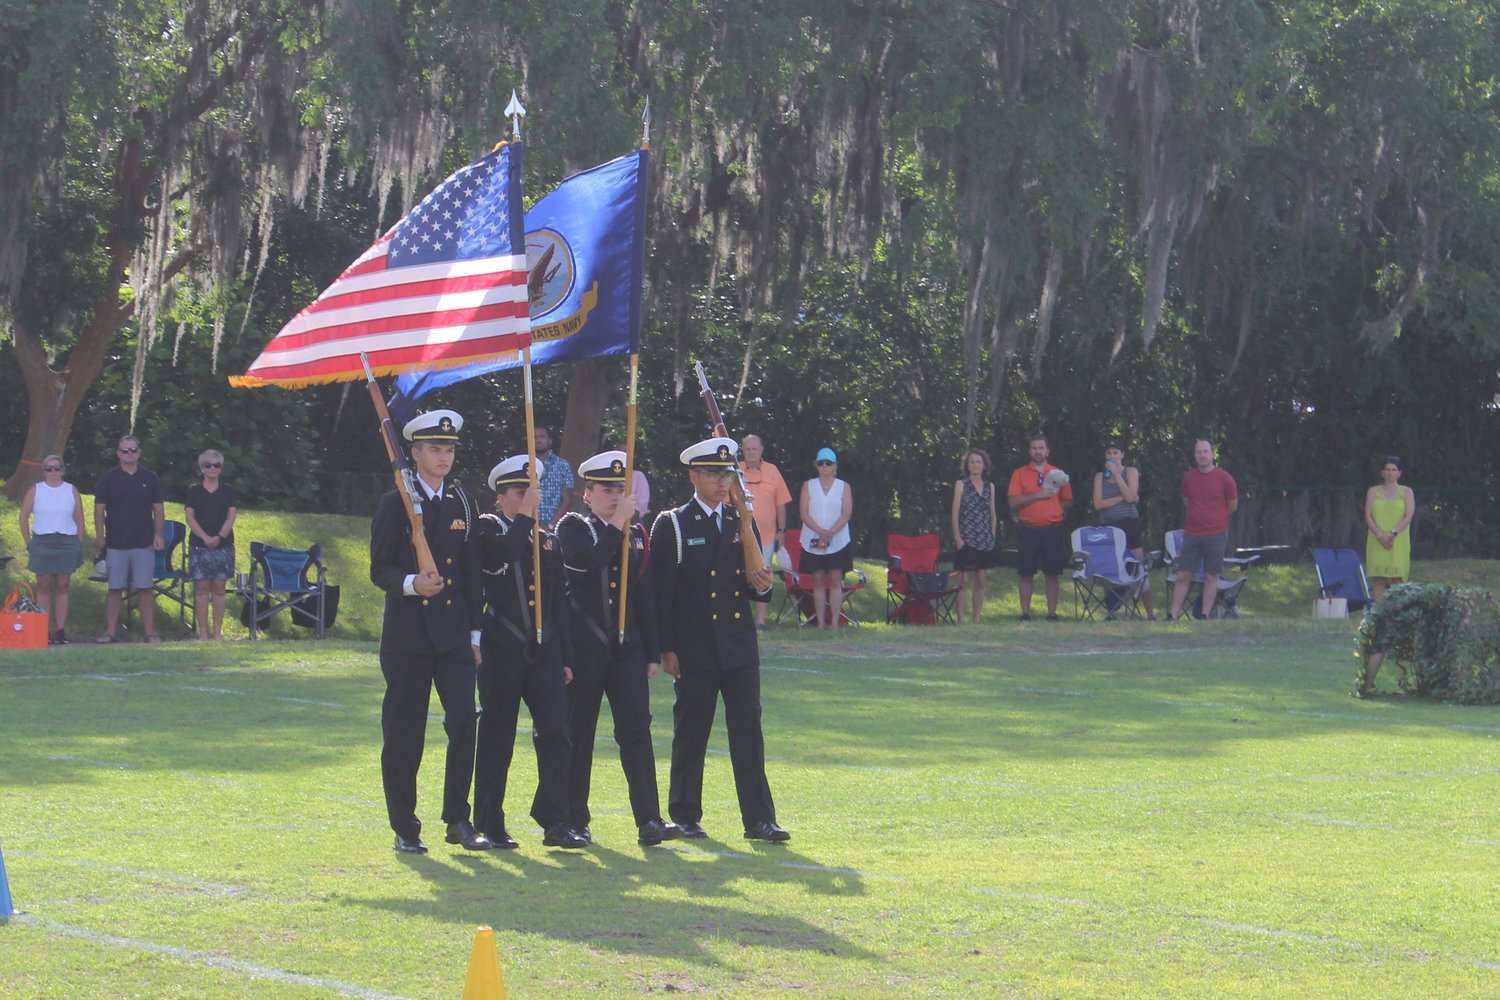 A color guard from Nease High School conducted a ceremony at The Bolles Lower School Ponte Vedra Beach Campus during a military-themed field day.